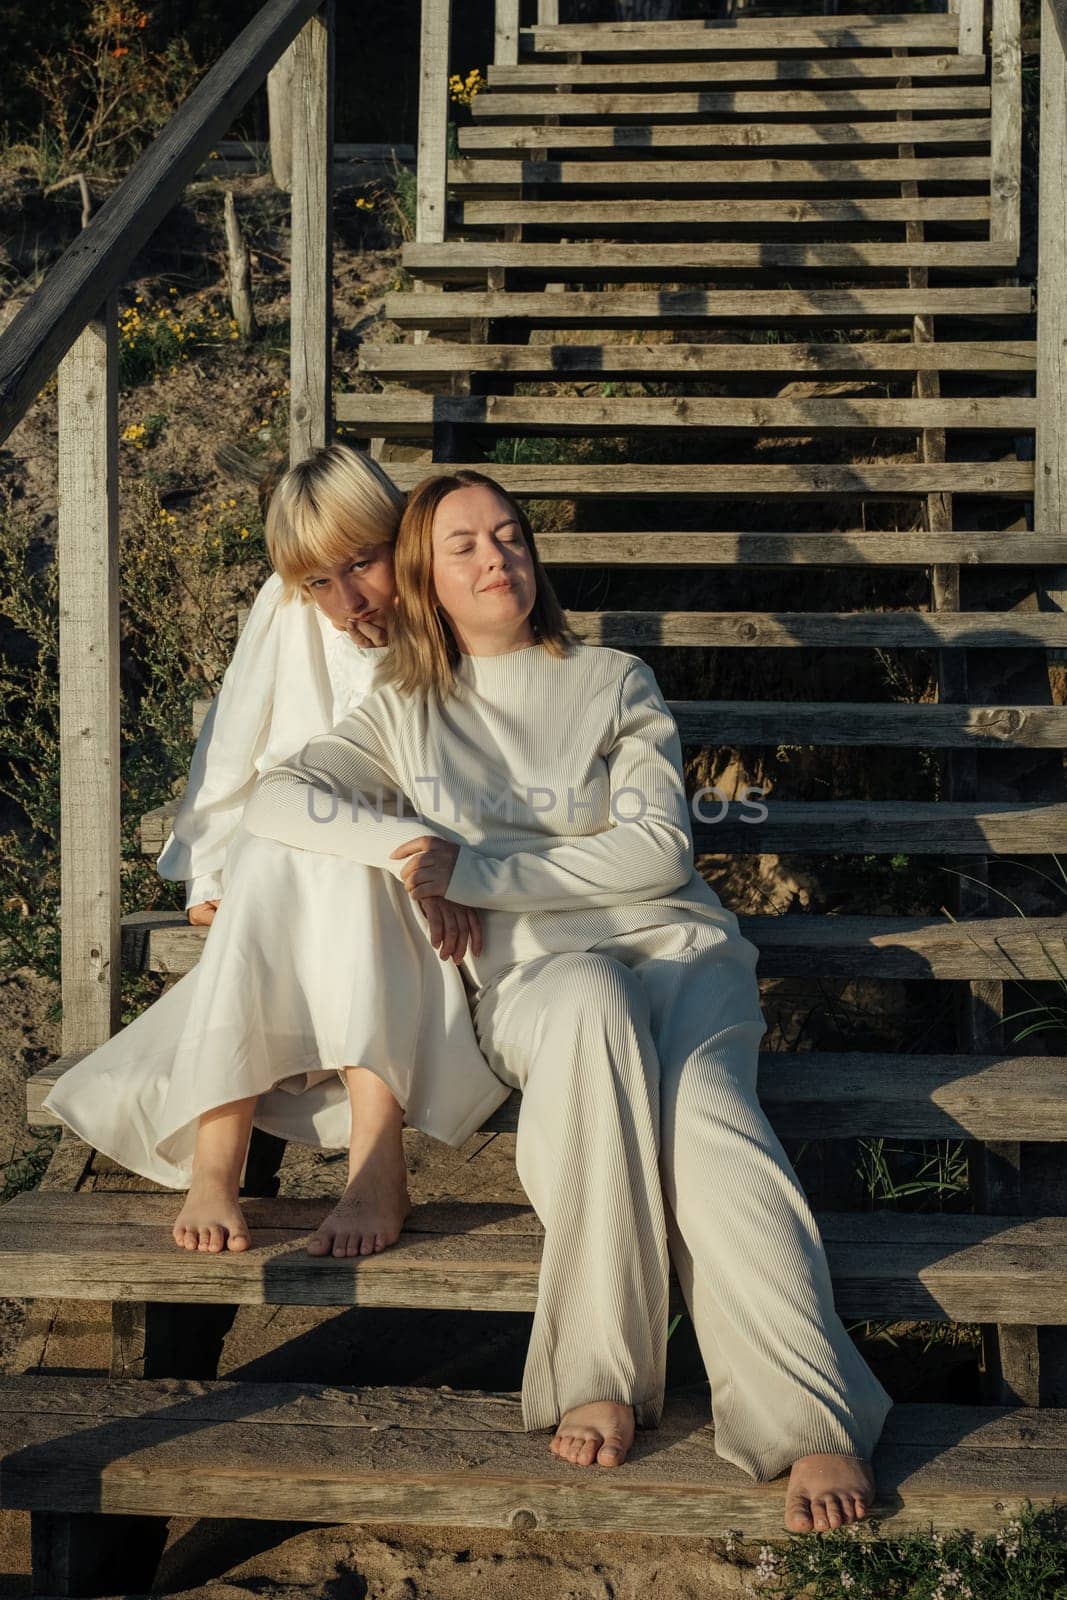 Two sisters sharing a tender moment as they embrace on the steps of a weathered wooden staircase, bathed in the warm glow of the setting sun.